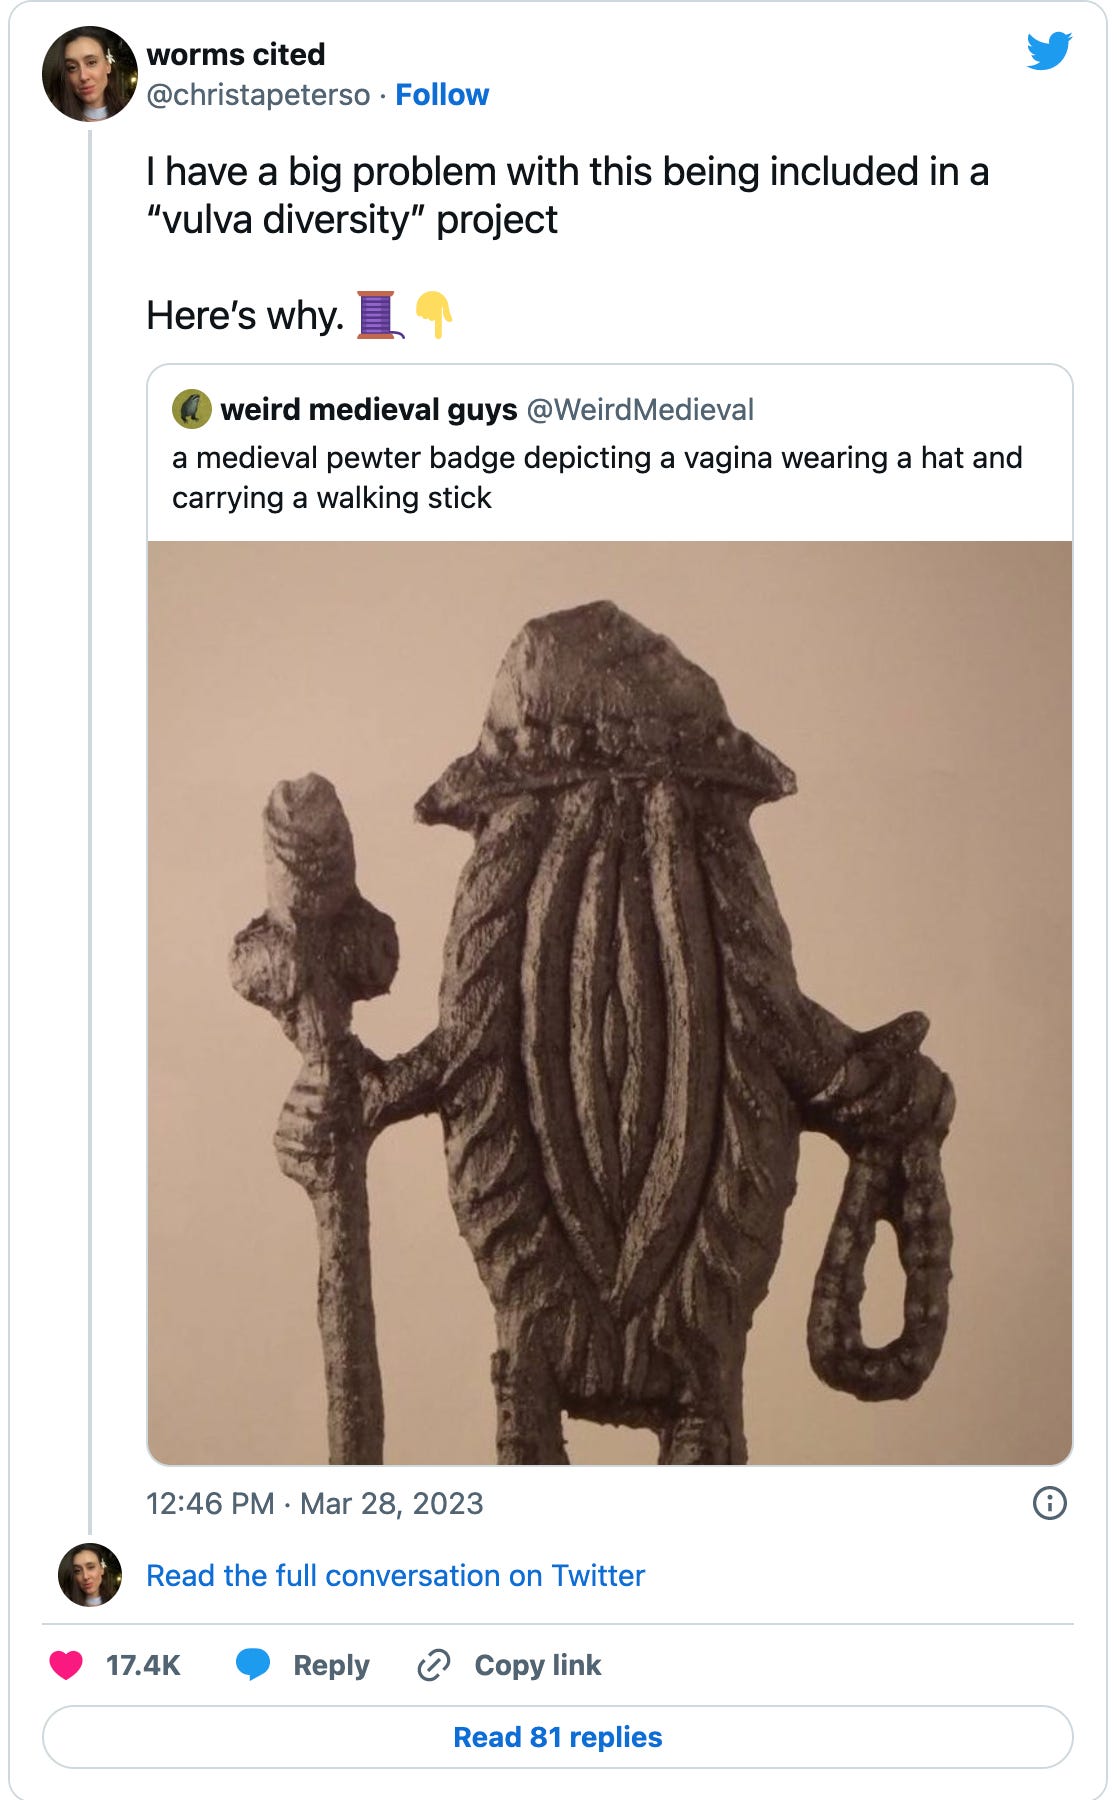 Tweet from @christapeterso quoting a “weird medieval guys” tweet of a picture of “a medieval pewter badge depicting a vagina wearing a hat and carrying a walking stick,” that reads: “I have a big problem with this being included in a “vulva diversity” project Here’s why. [hand pointing down emoji] [thread emoji]”